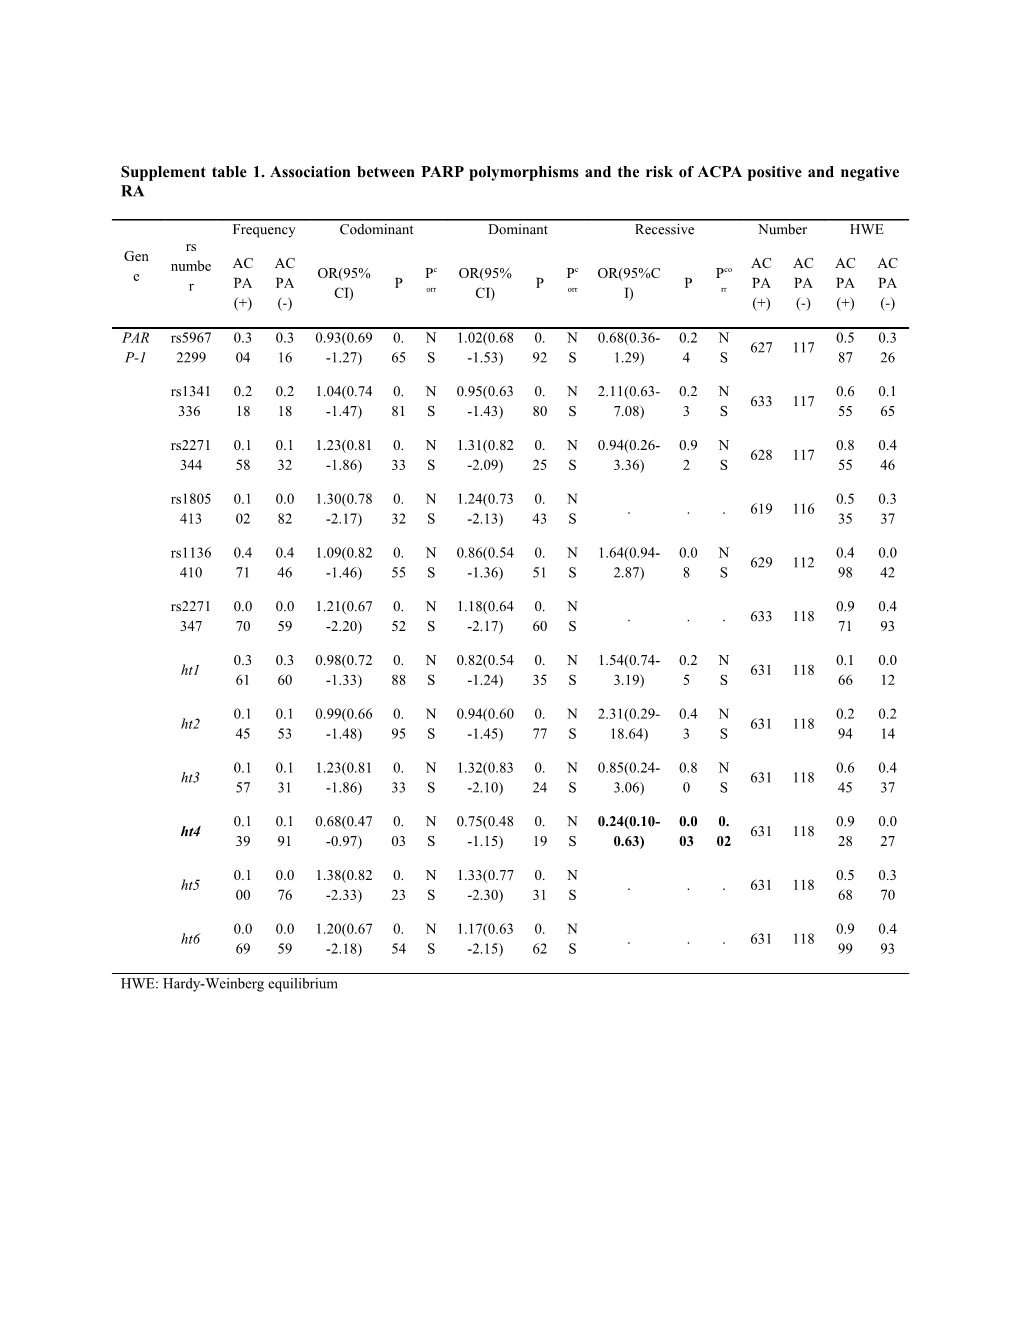 Supplement Table 1. Association Between PARP Polymorphisms and the Risk of ACPA Positive